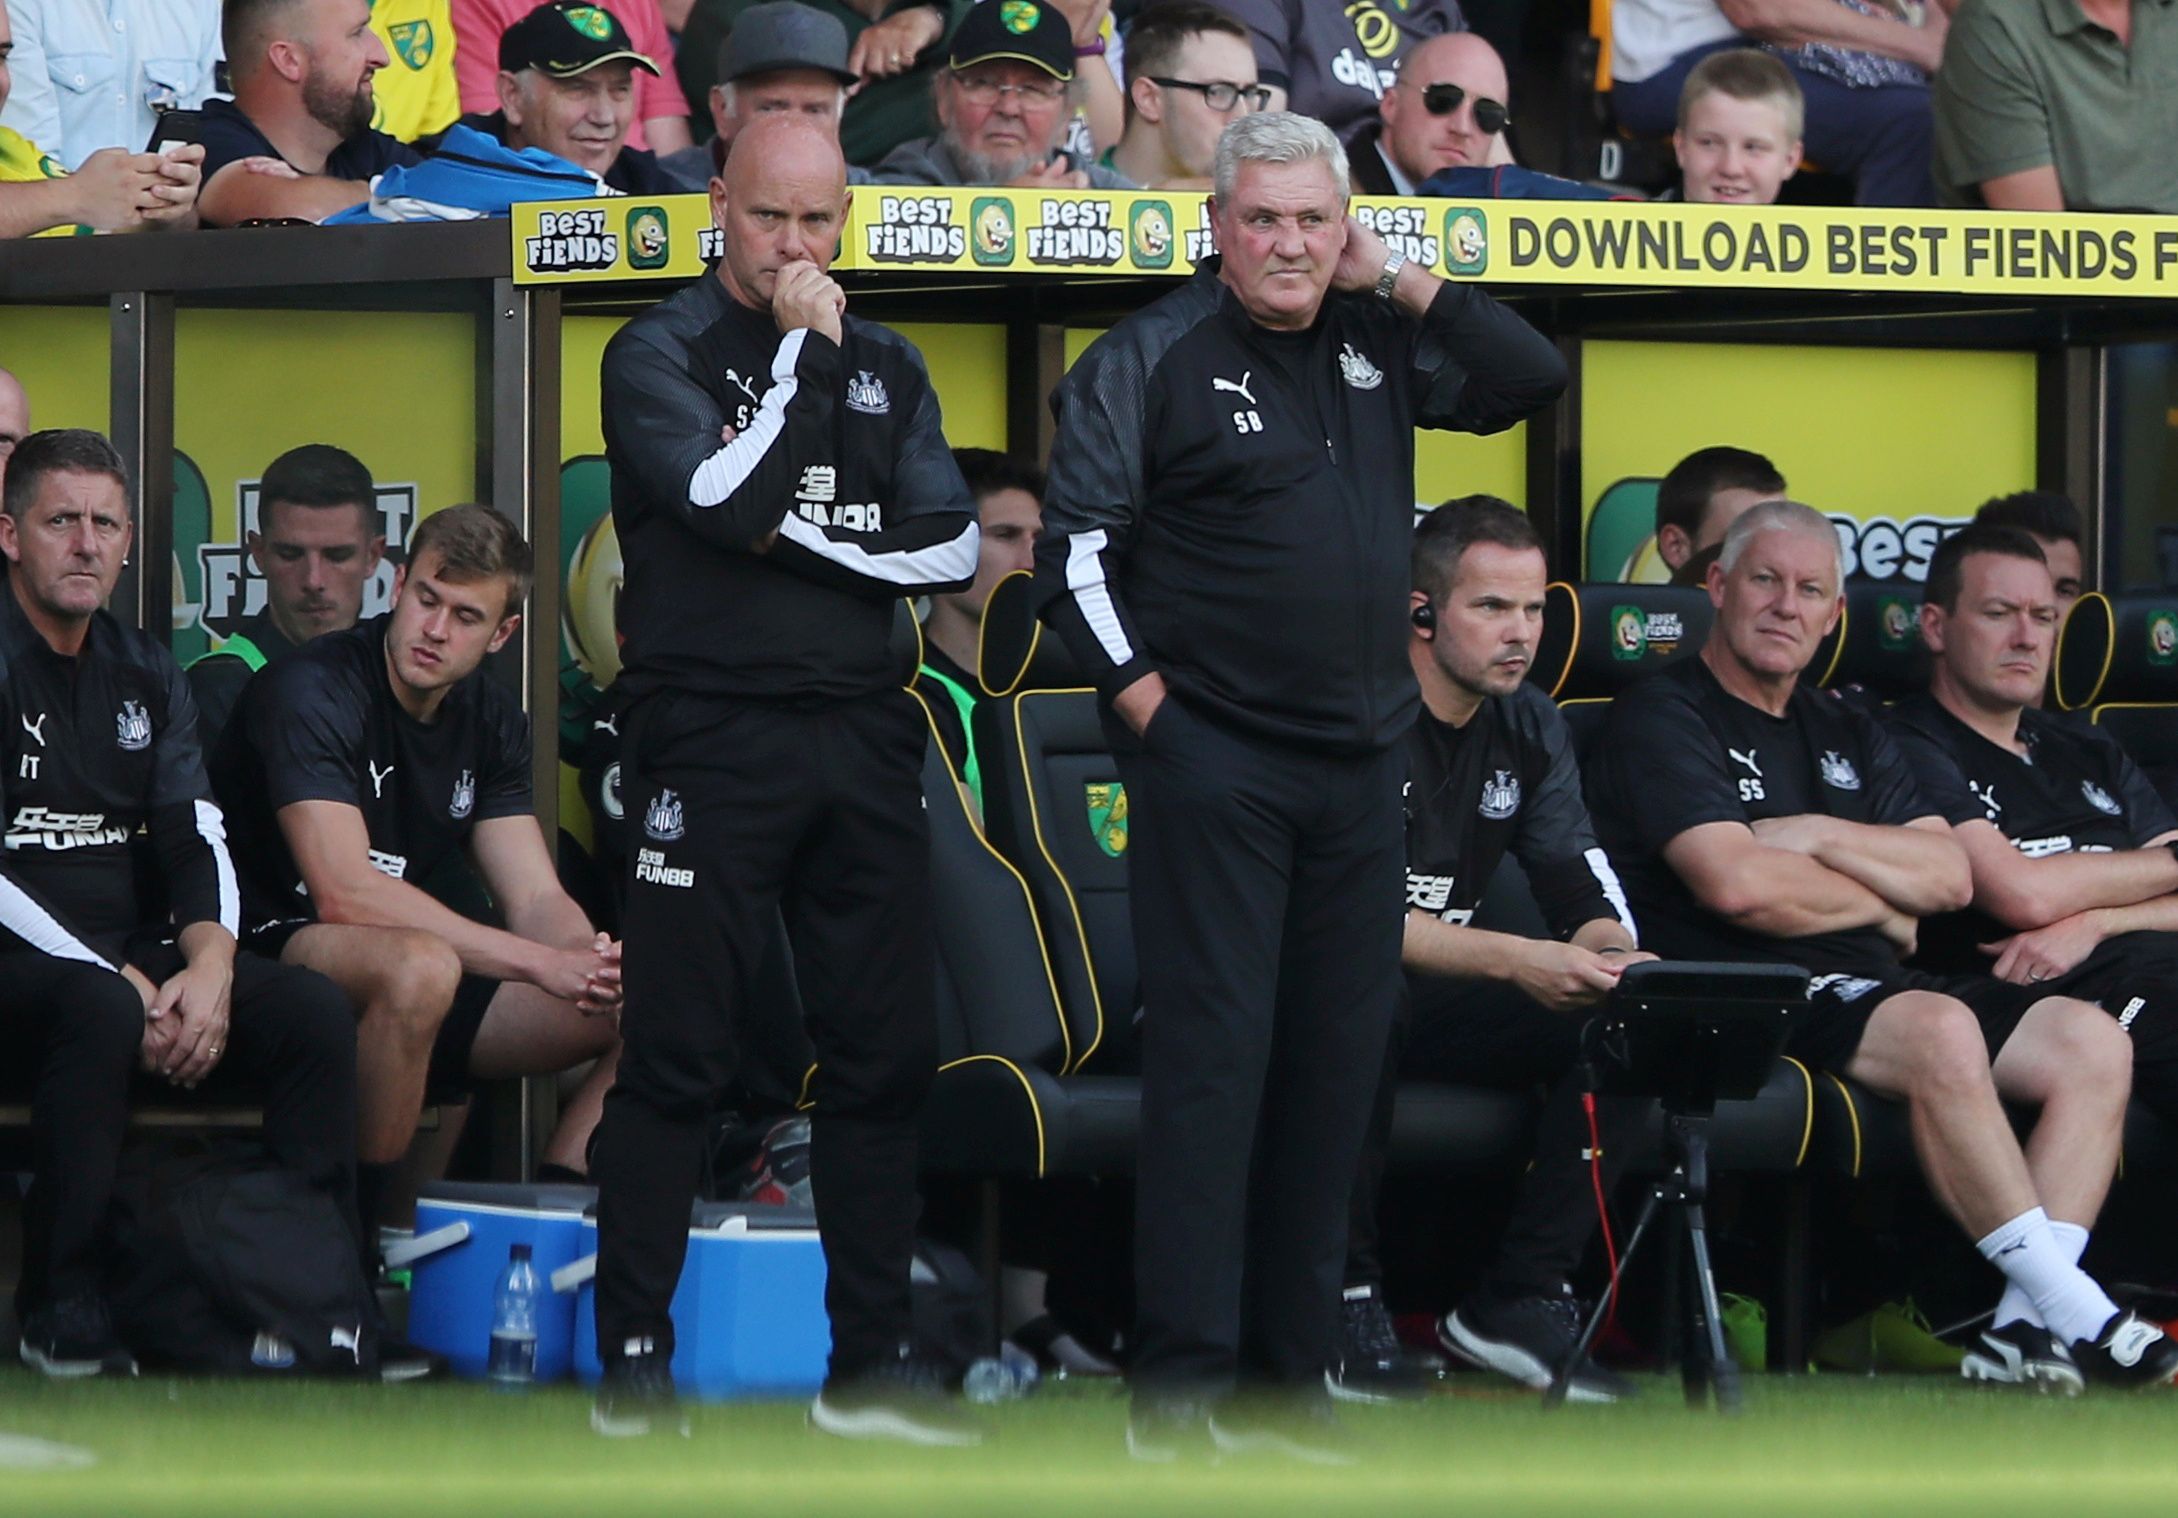 Soccer Football - Premier League - Norwich City v Newcastle United - Carrow Road, Norwich, Britain - August 17, 2019  Newcastle United manager Steve Bruce and assistant manager Steve Agnew                 Action Images via Reuters/Molly Darlington  EDITORIAL USE ONLY. No use with unauthorized audio, video, data, fixture lists, club/league logos or 